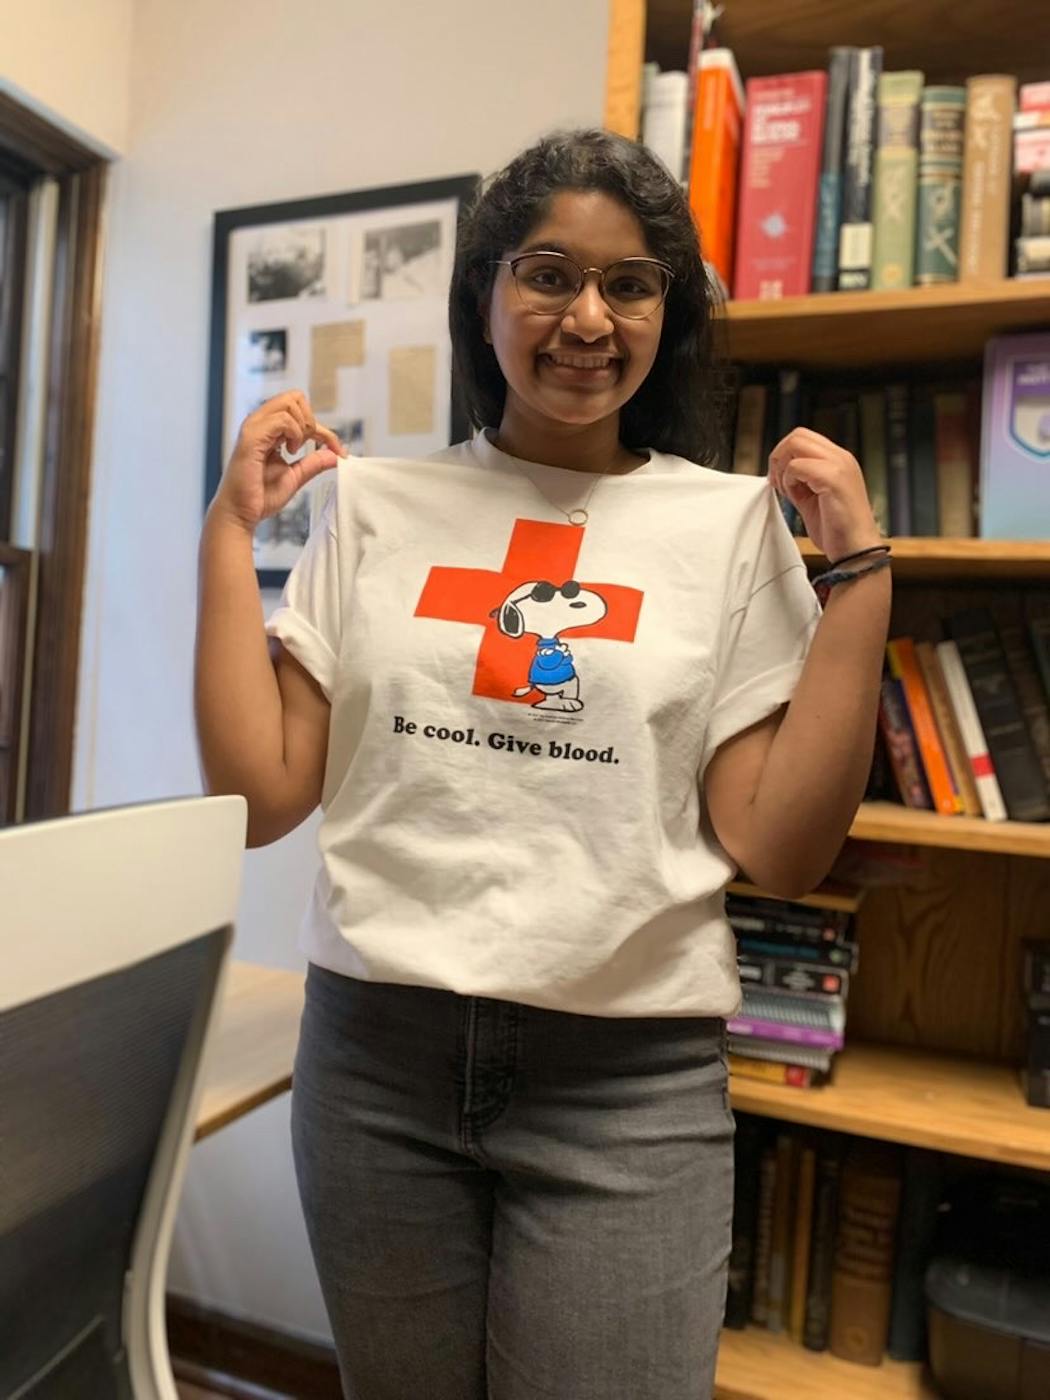 A TikTok video of the Red Cross exclusive Snoopy shirt prompted University of Minnesota medical student Sanjana Molleti to donate blood for the first time. She said the cute, nostalgic character fits with Gen Z’s love of limited-editions and collecting mementos.